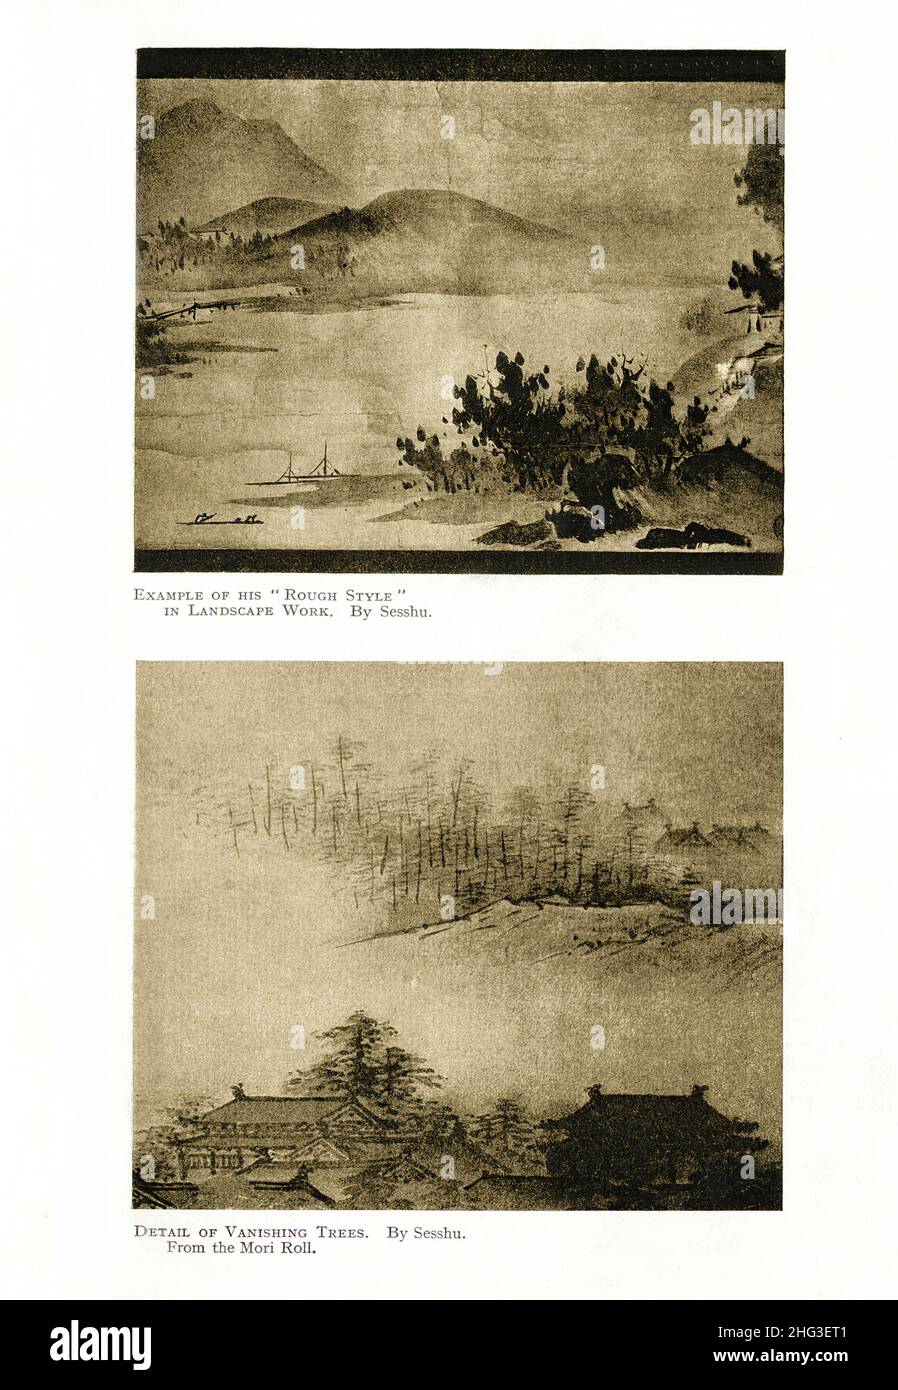 Japanese medieval paintings by Sesshu: Example of his 'Rouch Style' in landscape work (top) and detail of Vanishing Trees. (from Mori Roll). Reproduct Stock Photo